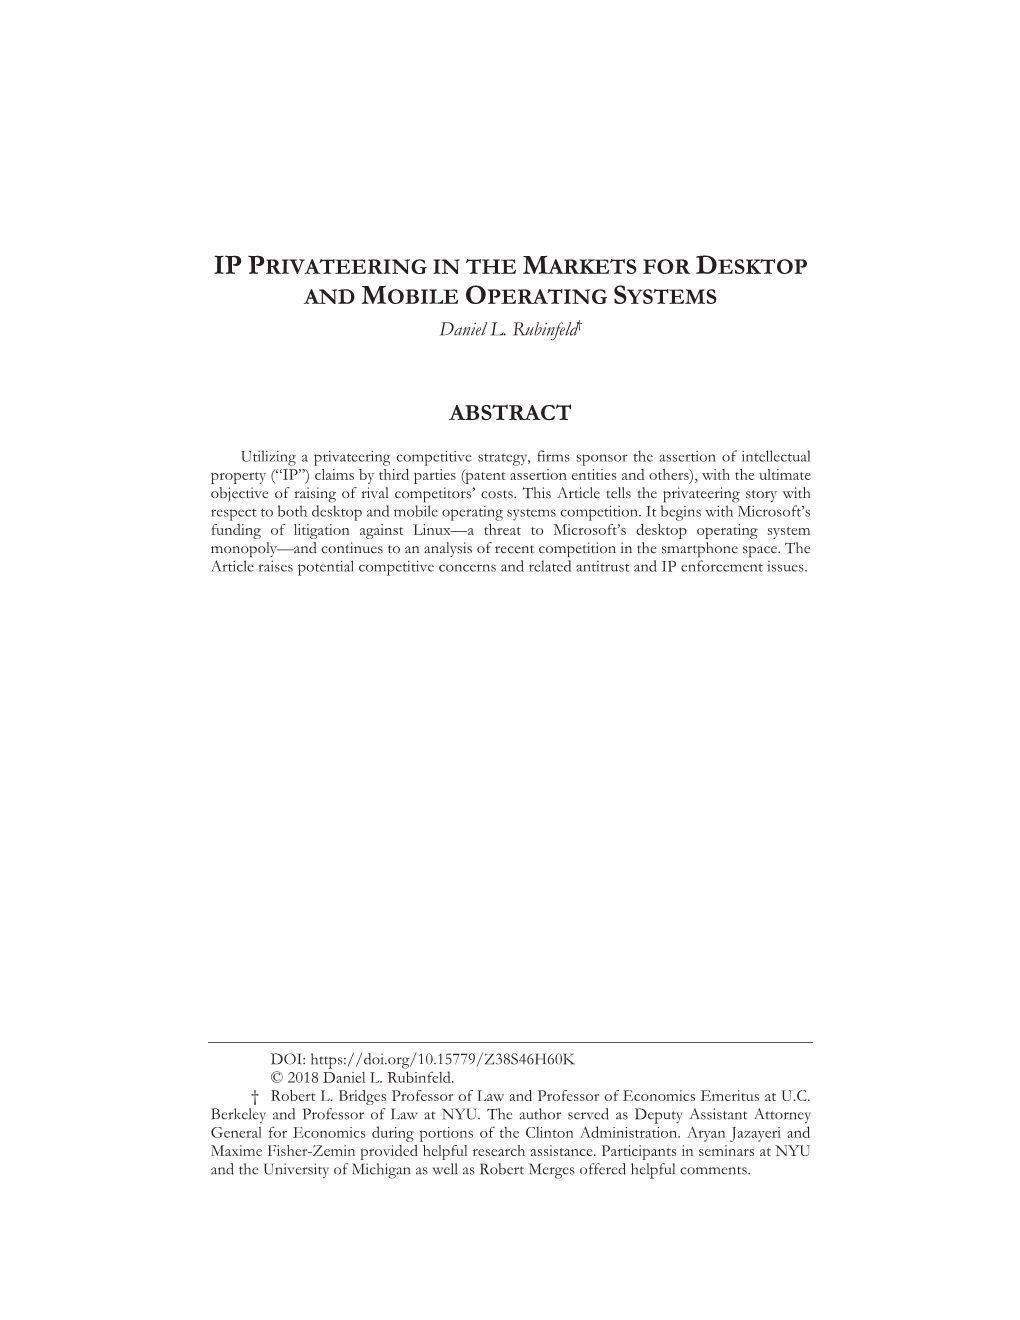 IP PRIVATEERING in the MARKETS for DESKTOP and MOBILE OPERATING SYSTEMS Daniel L